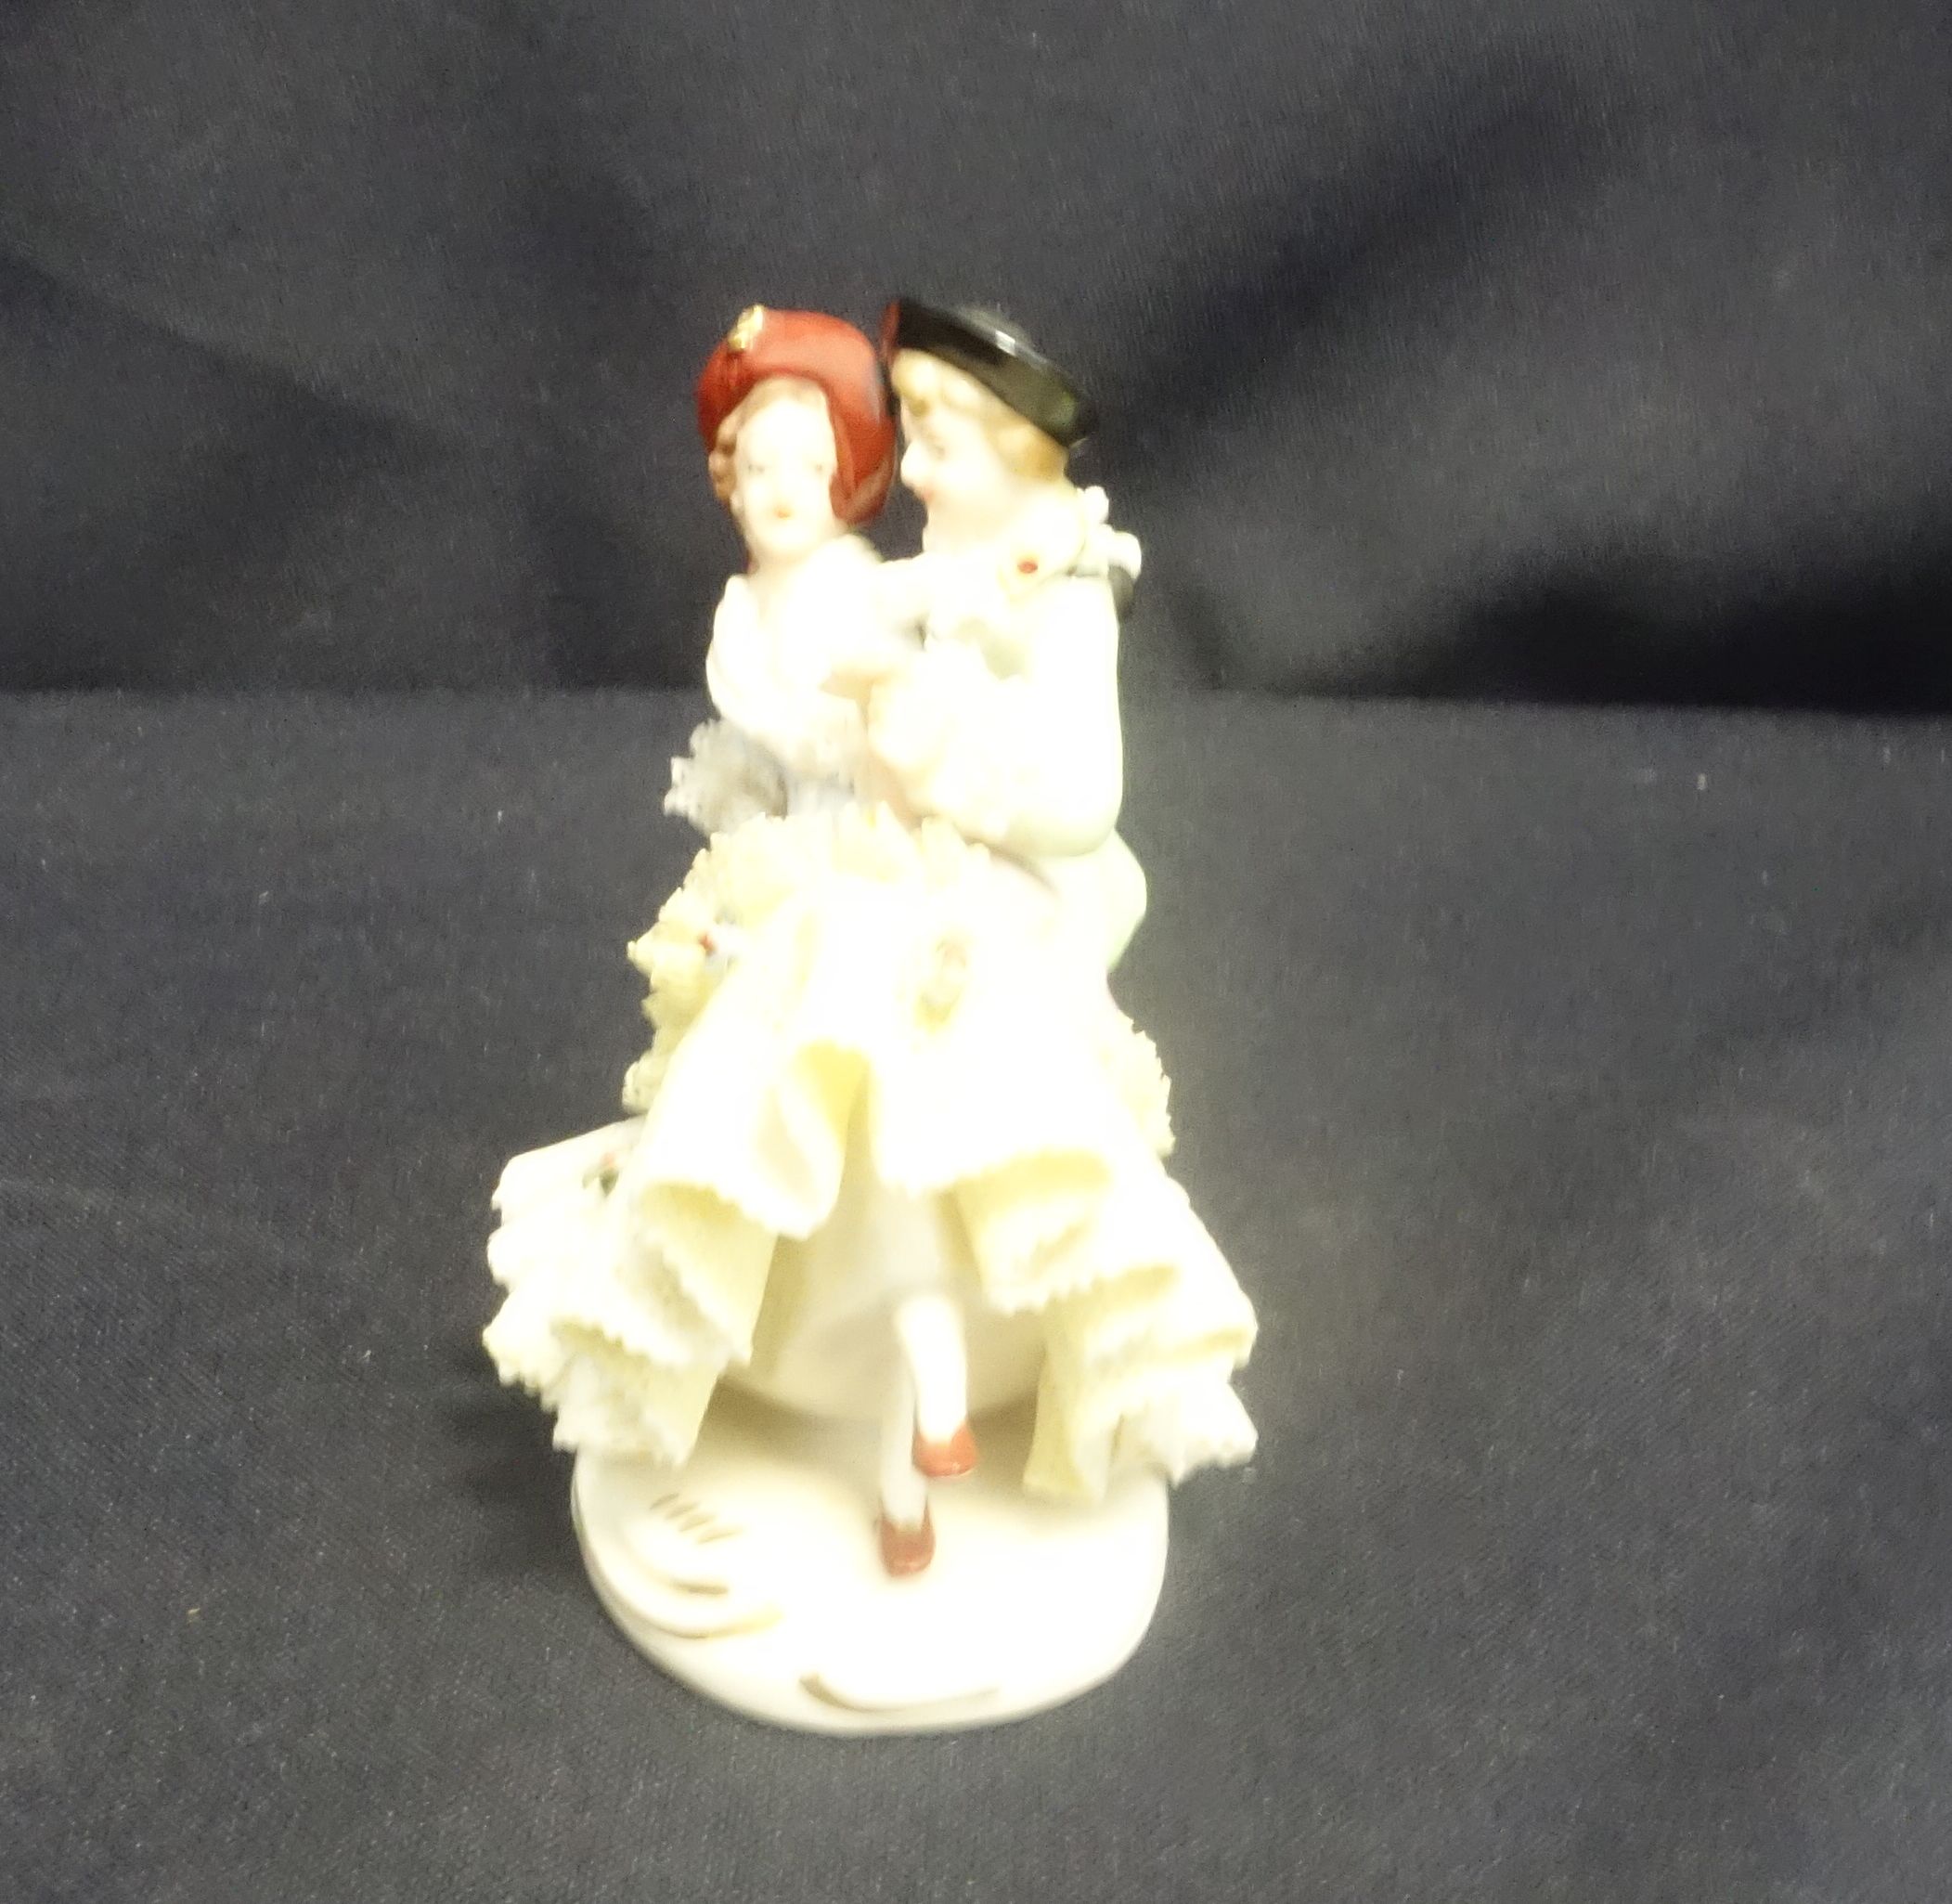 SMALL PORCELAIN FIGURE GROUP / LACE FIGURE - Image 2 of 4